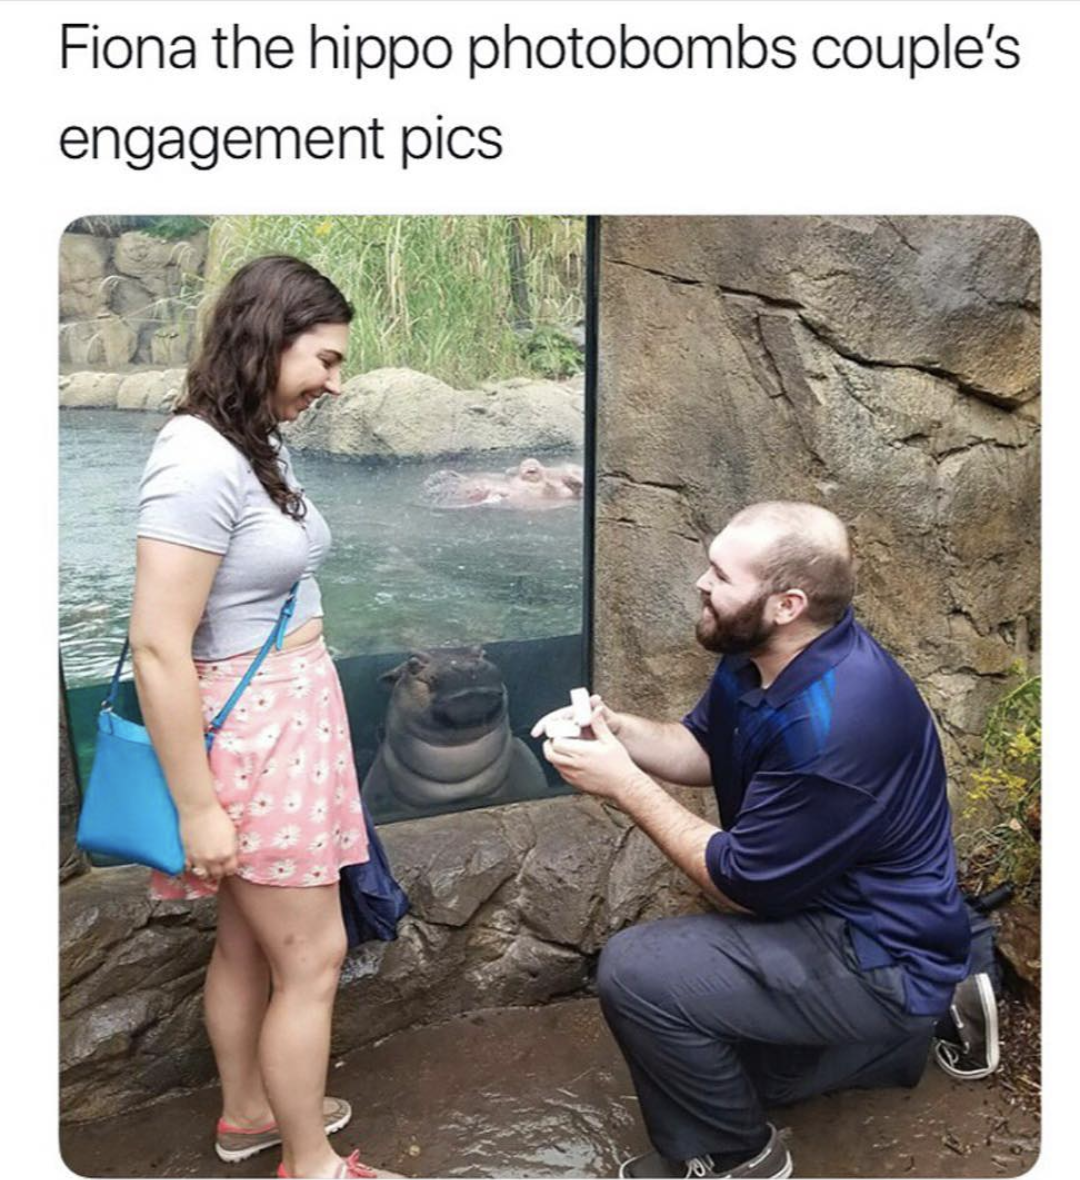 food for the hungry - Fiona the hippo photobombs couple's engagement pics